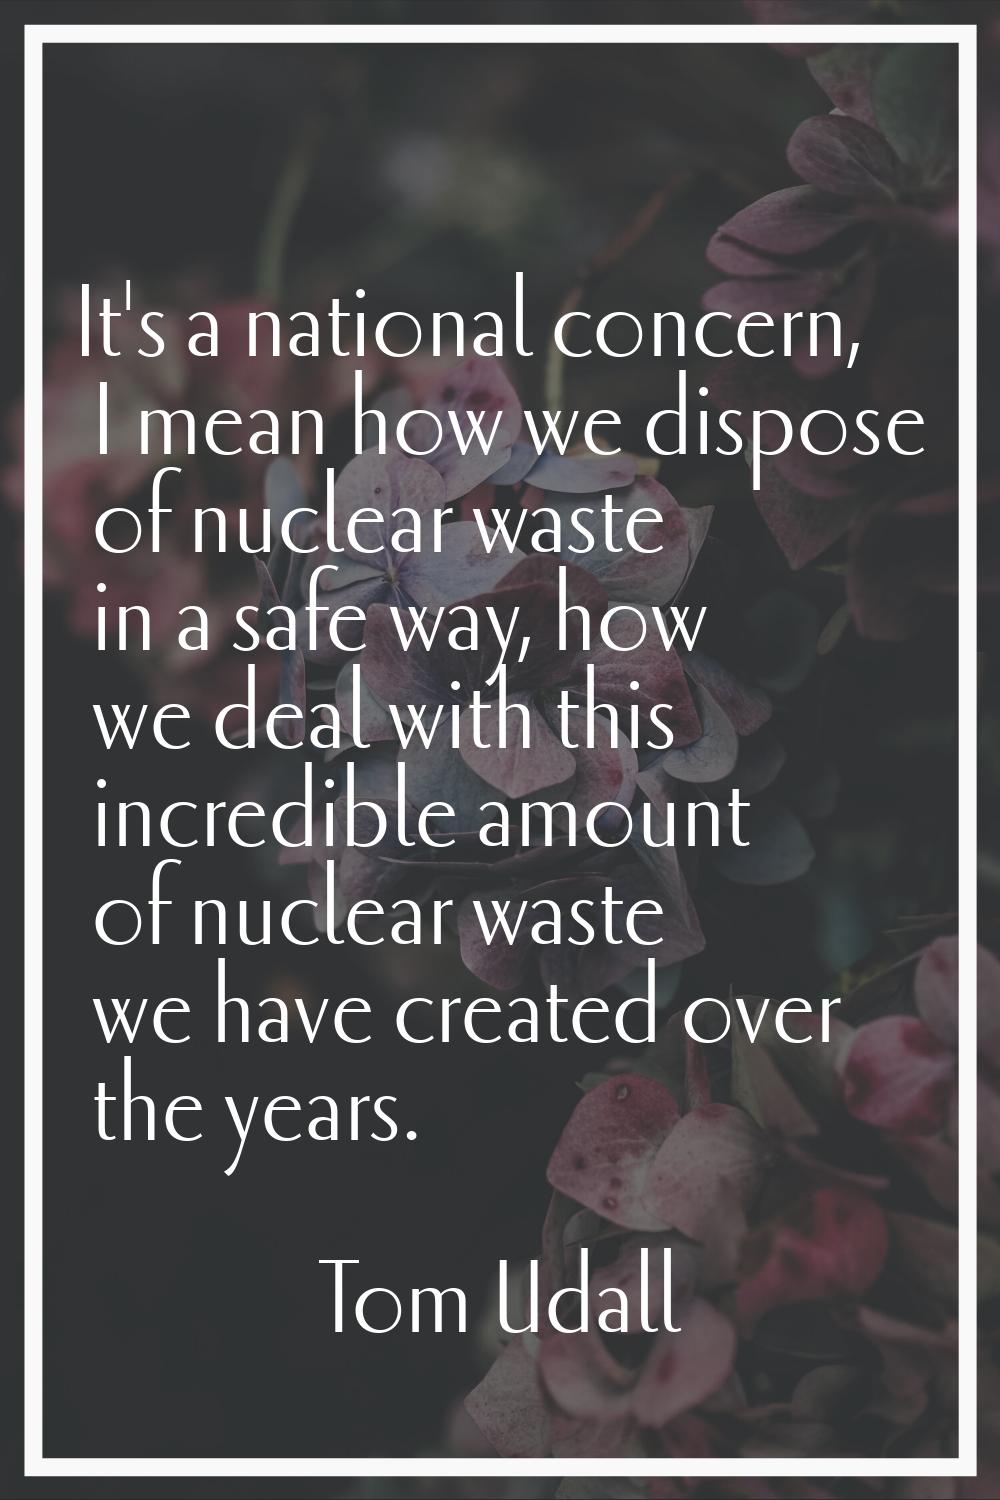 It's a national concern, I mean how we dispose of nuclear waste in a safe way, how we deal with thi